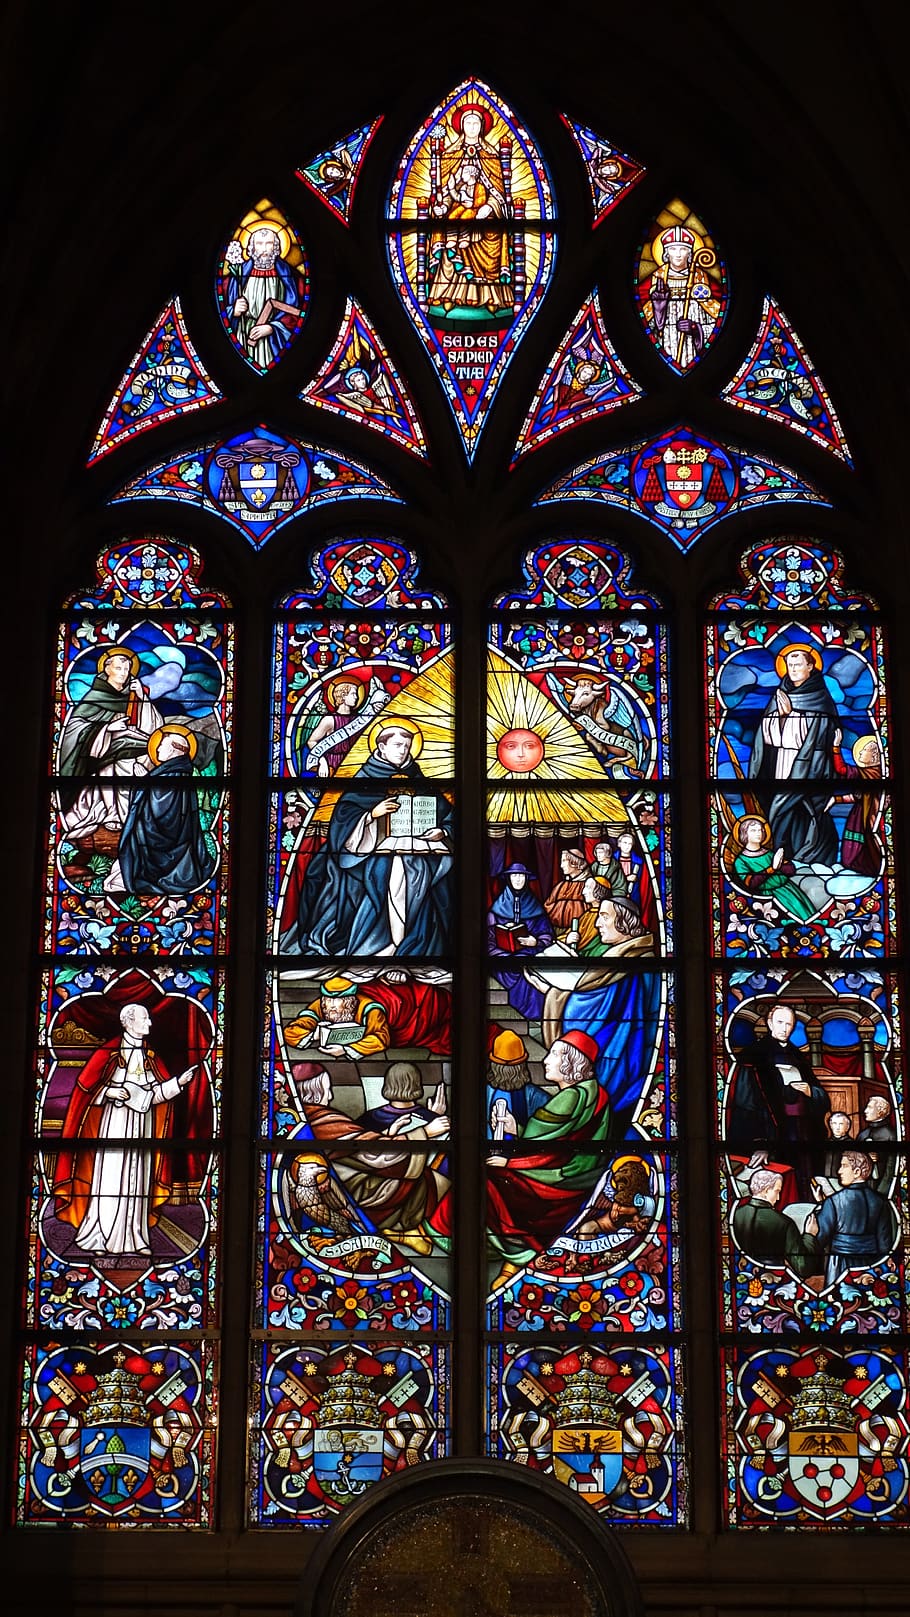 church window, stained glass window, stained glass, church, architecture, religion, faith, christianity, catholicism, mechelen